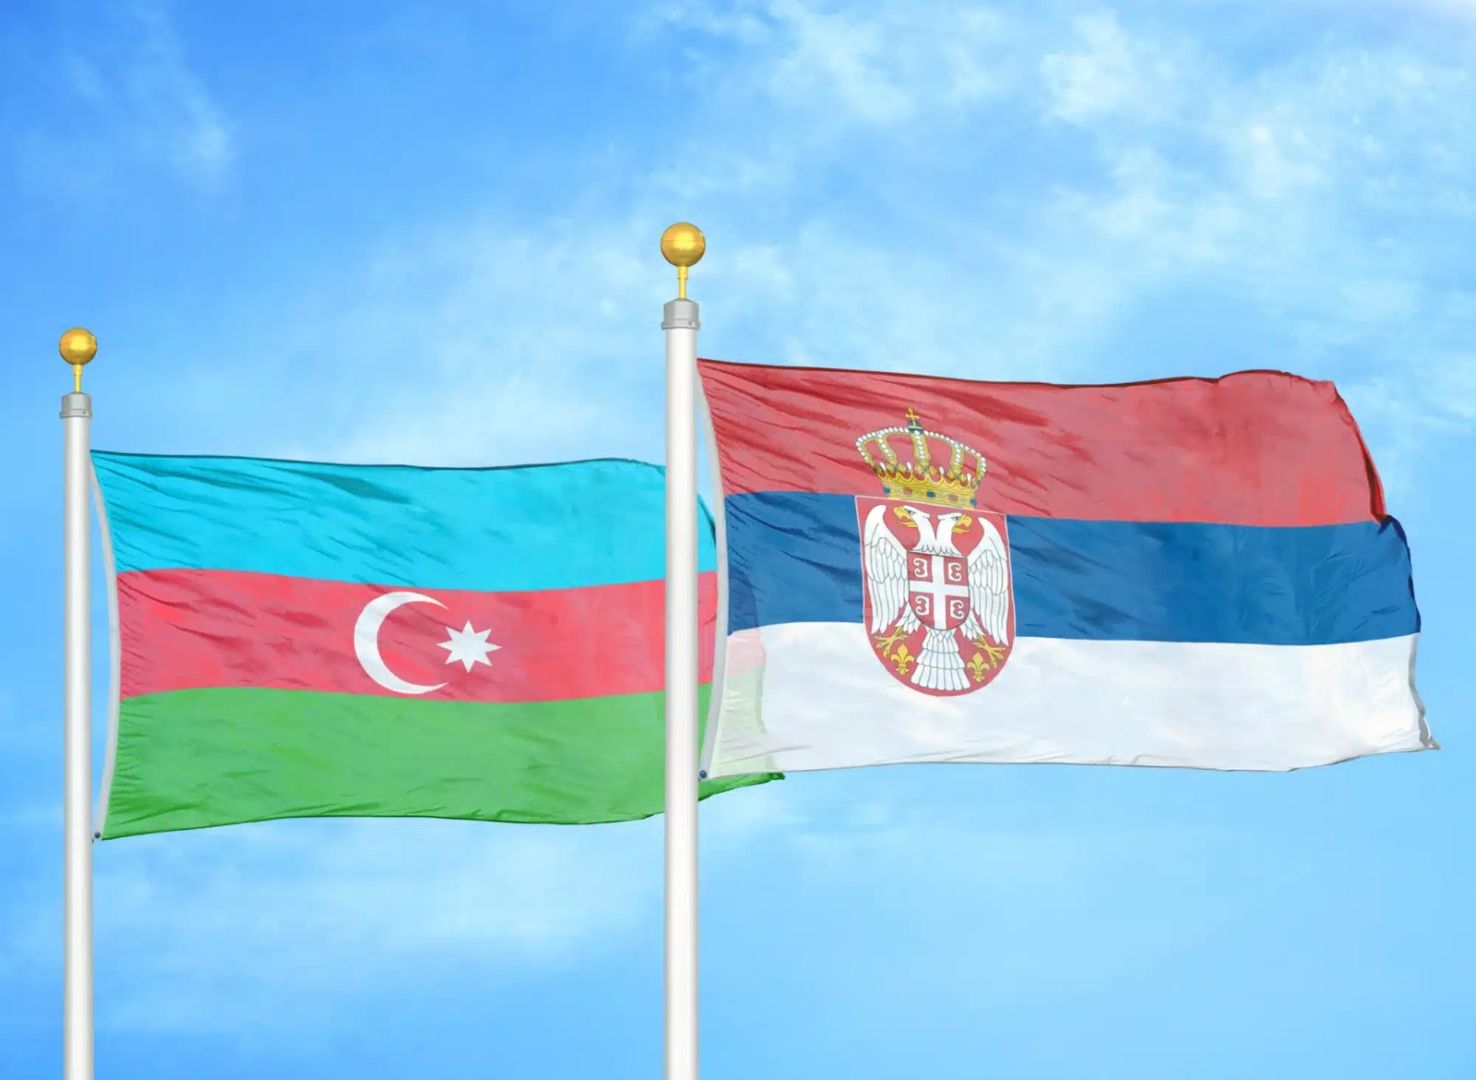 Azerbaijan-Serbia economic cooperation sees steady growth in investments and trade